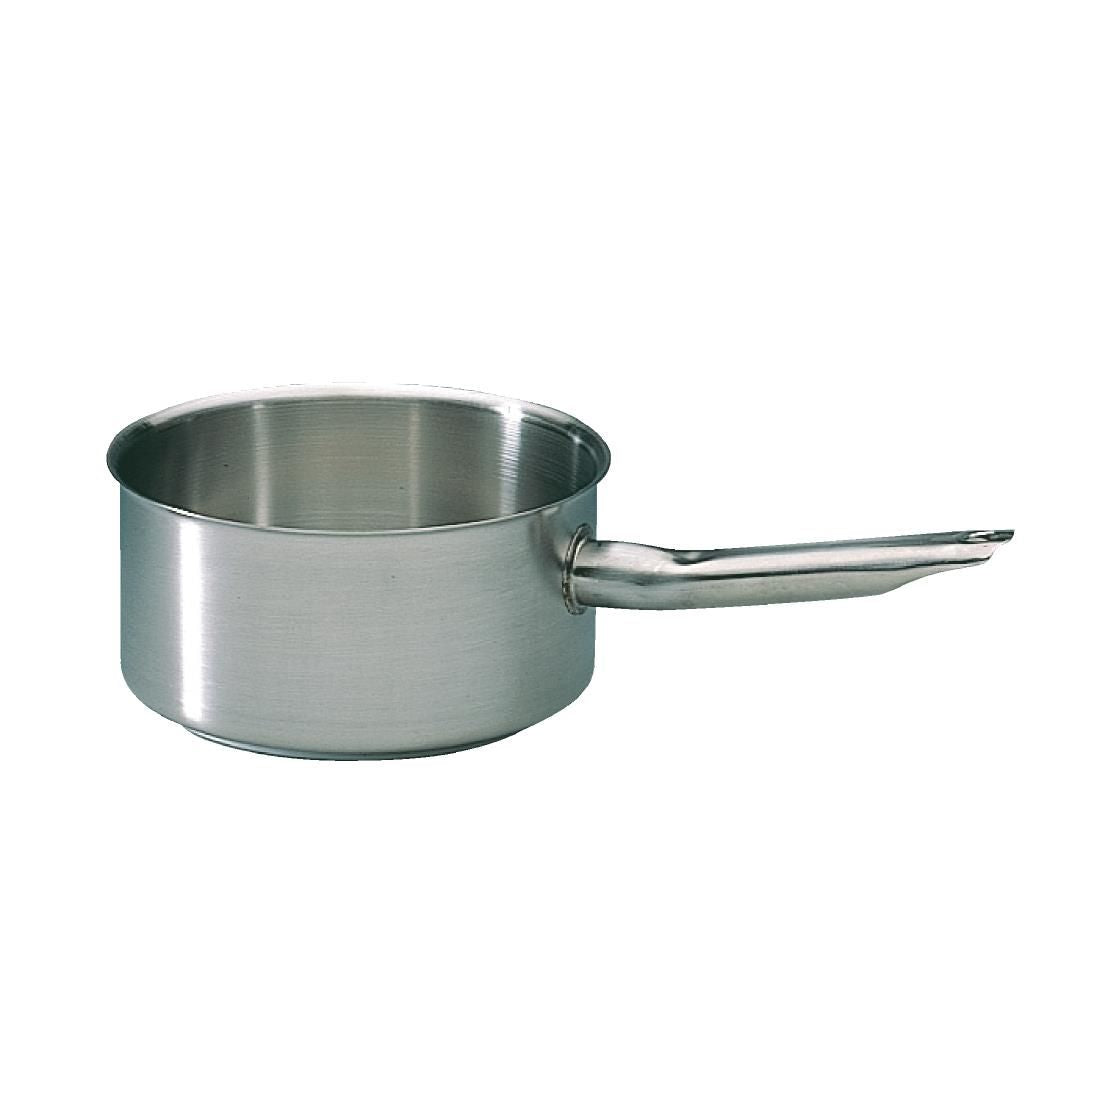 Bourgeat Stainless Steel Excellence Saucepan 3.1Ltr JD Catering Equipment Solutions Ltd